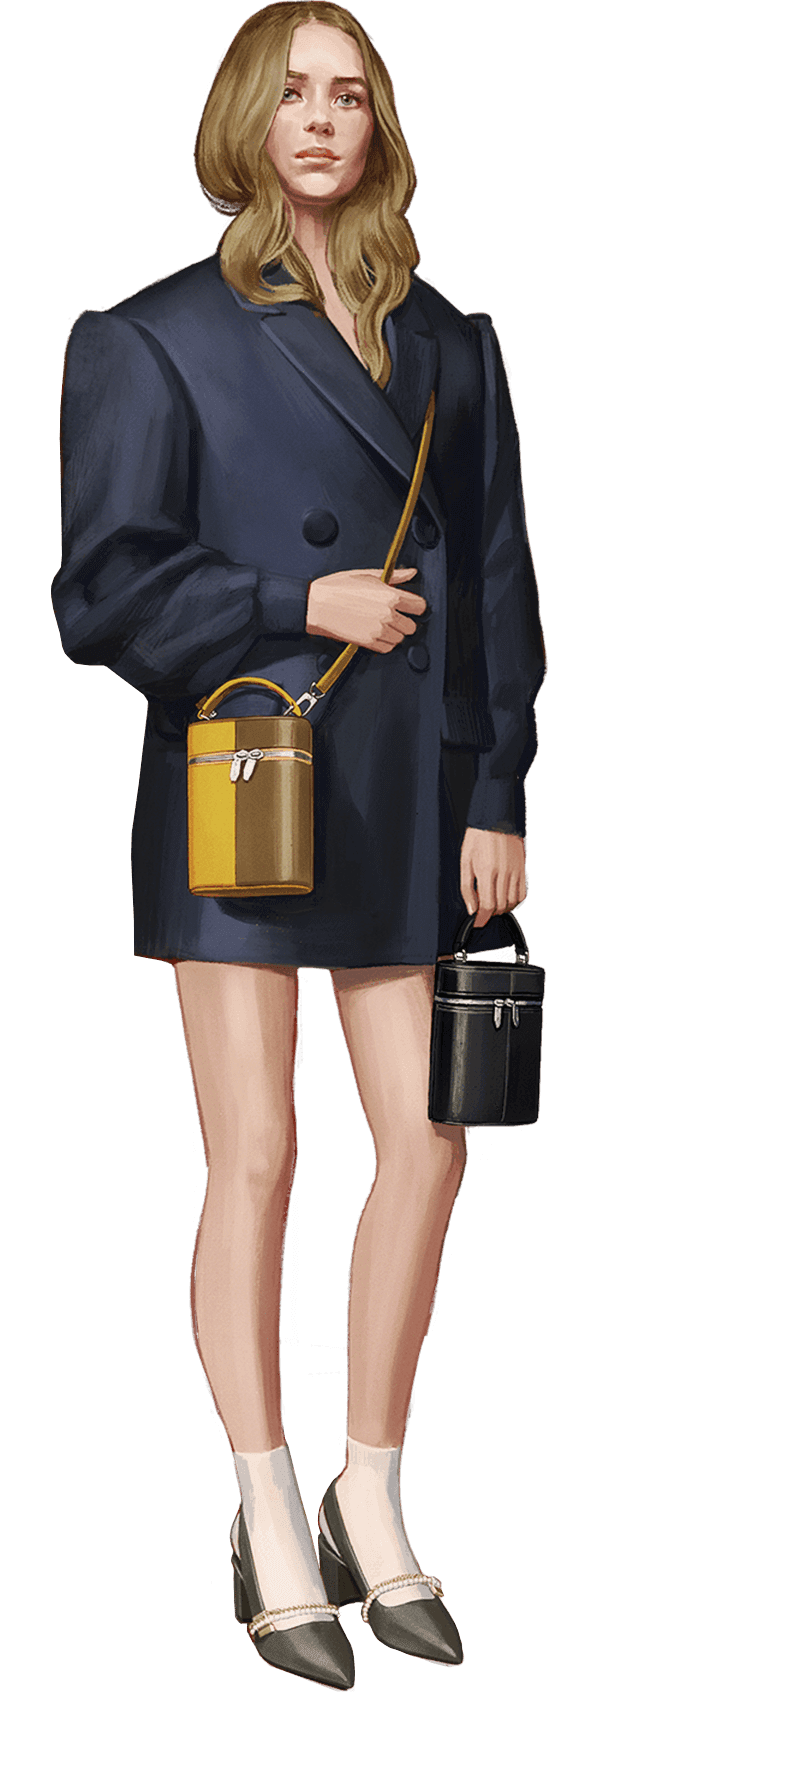 A compilation of illustrations from the CHARLES & KEITH Fall Winter 2020 campaign - CHARLES & KEITH - Web - Model 2